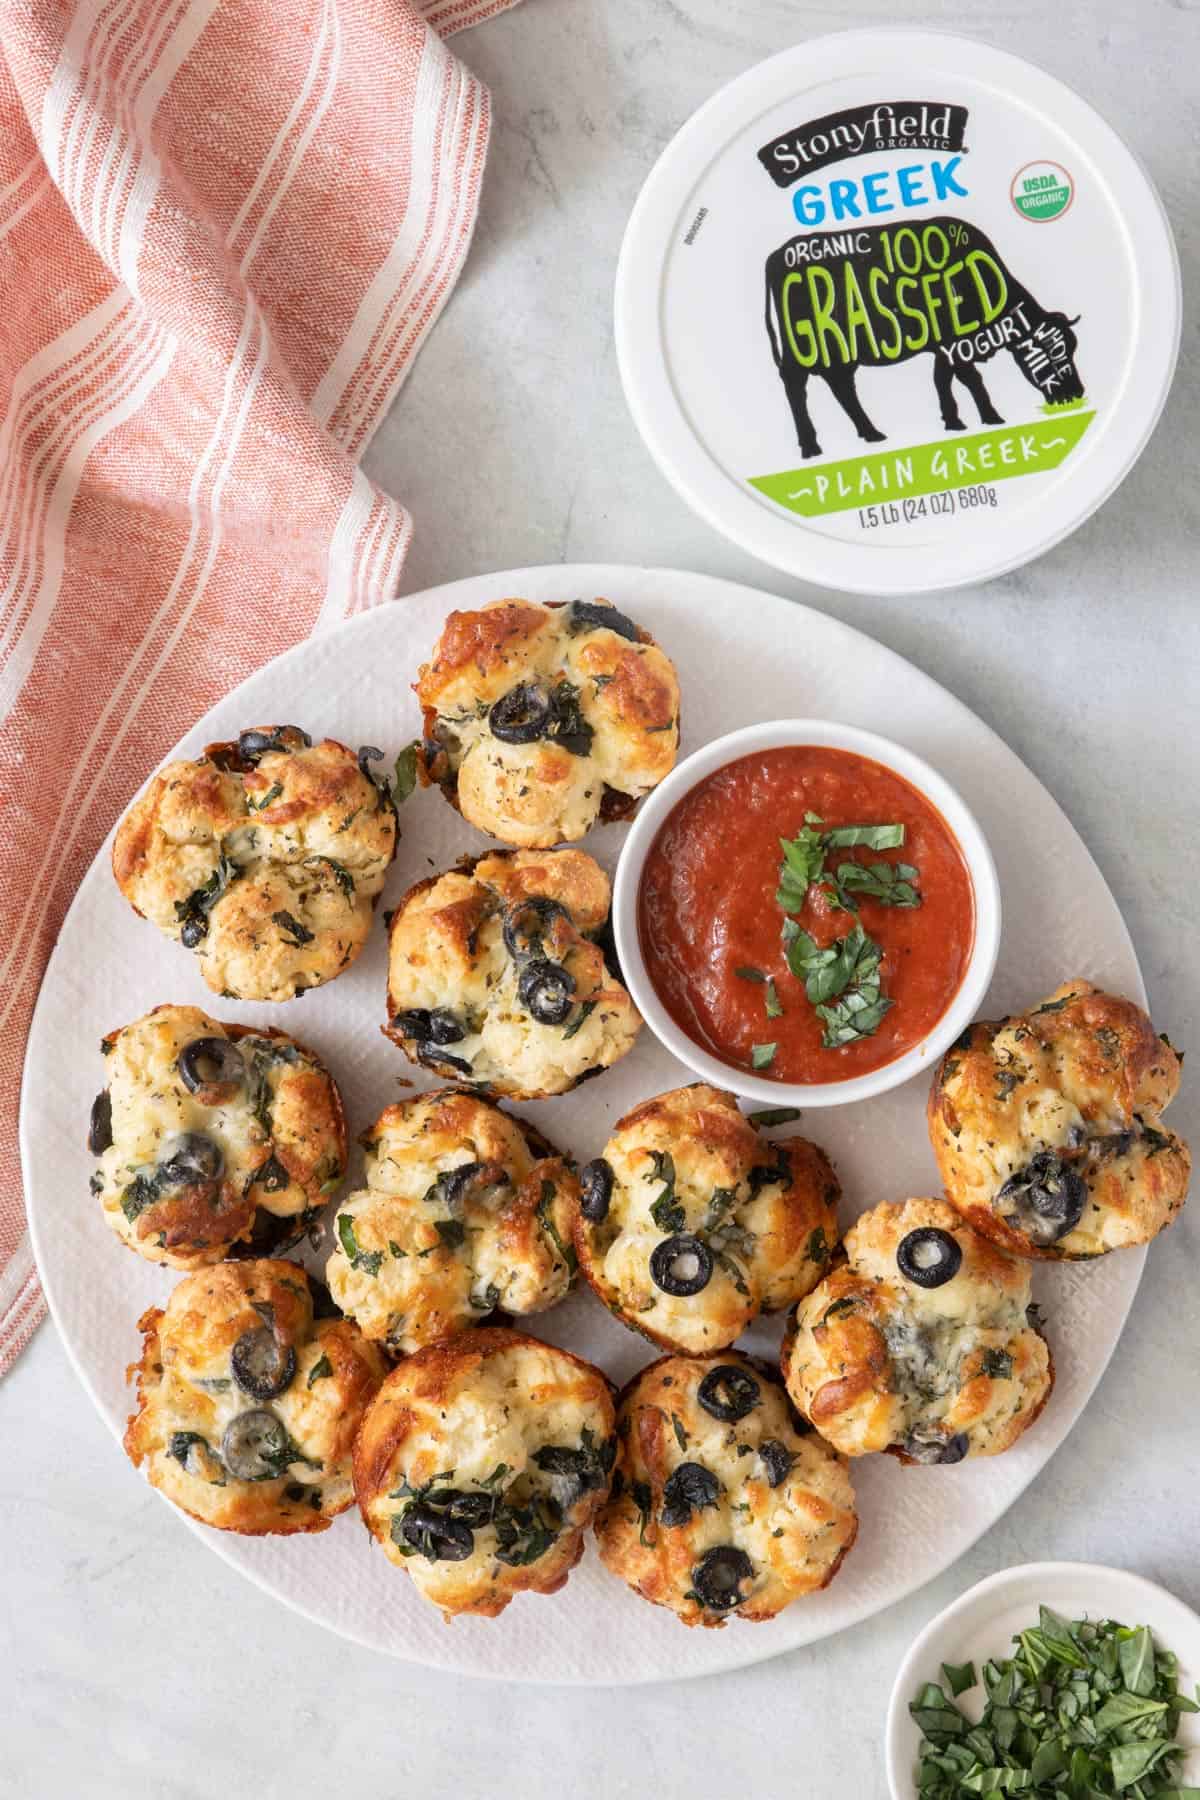 Pizza bites in round plate with pizza sauce for dipping and a tub of Greek yogurt to the side.